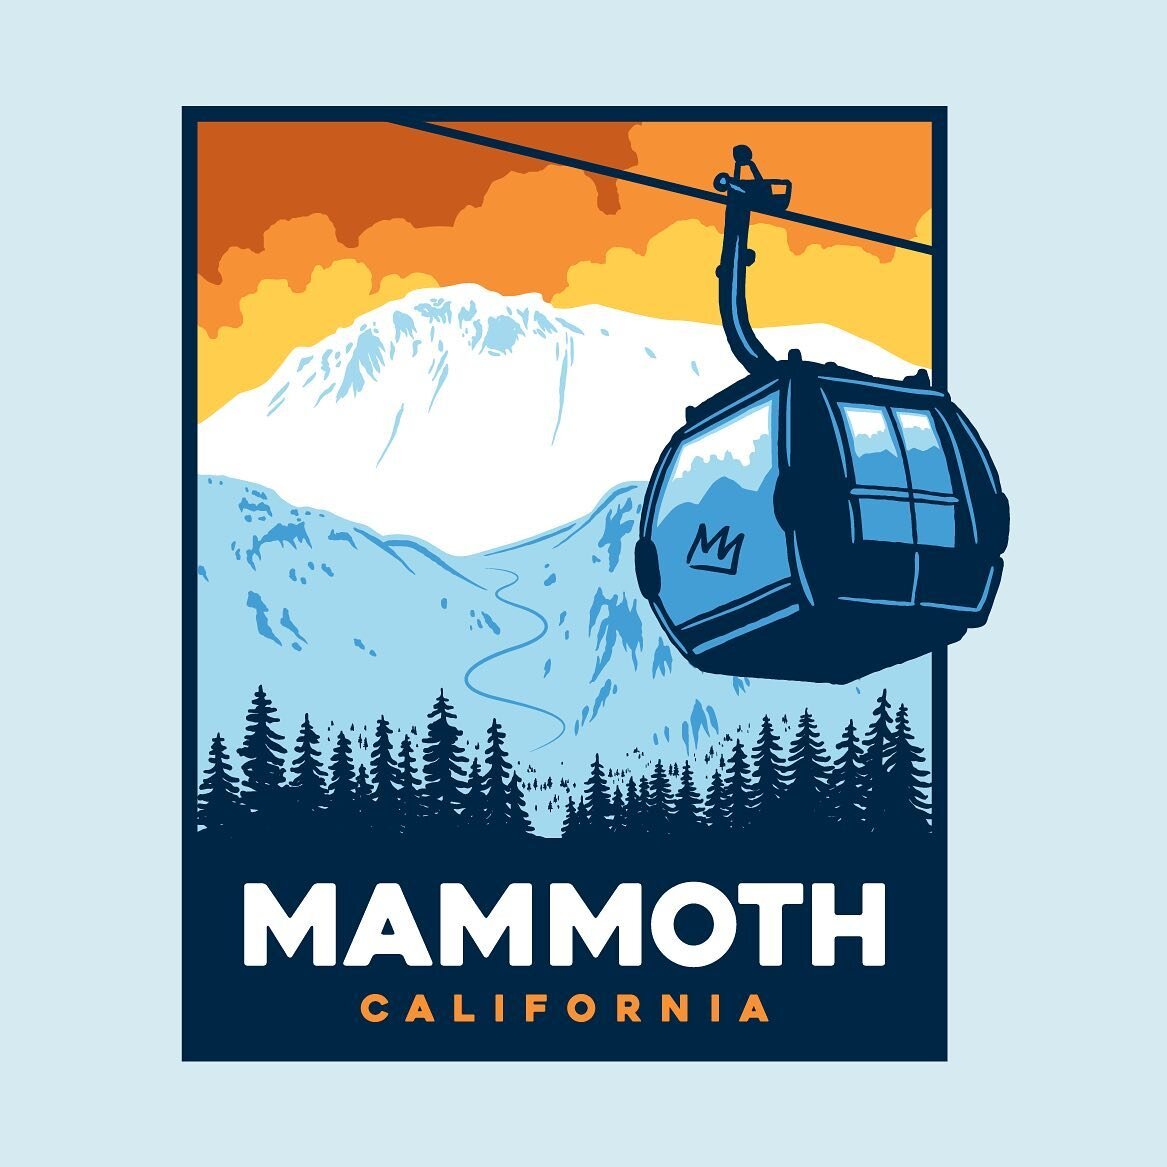 I got to work on some fun trinkets and doodads for @mammothmountain Get your frozen digits on them now!